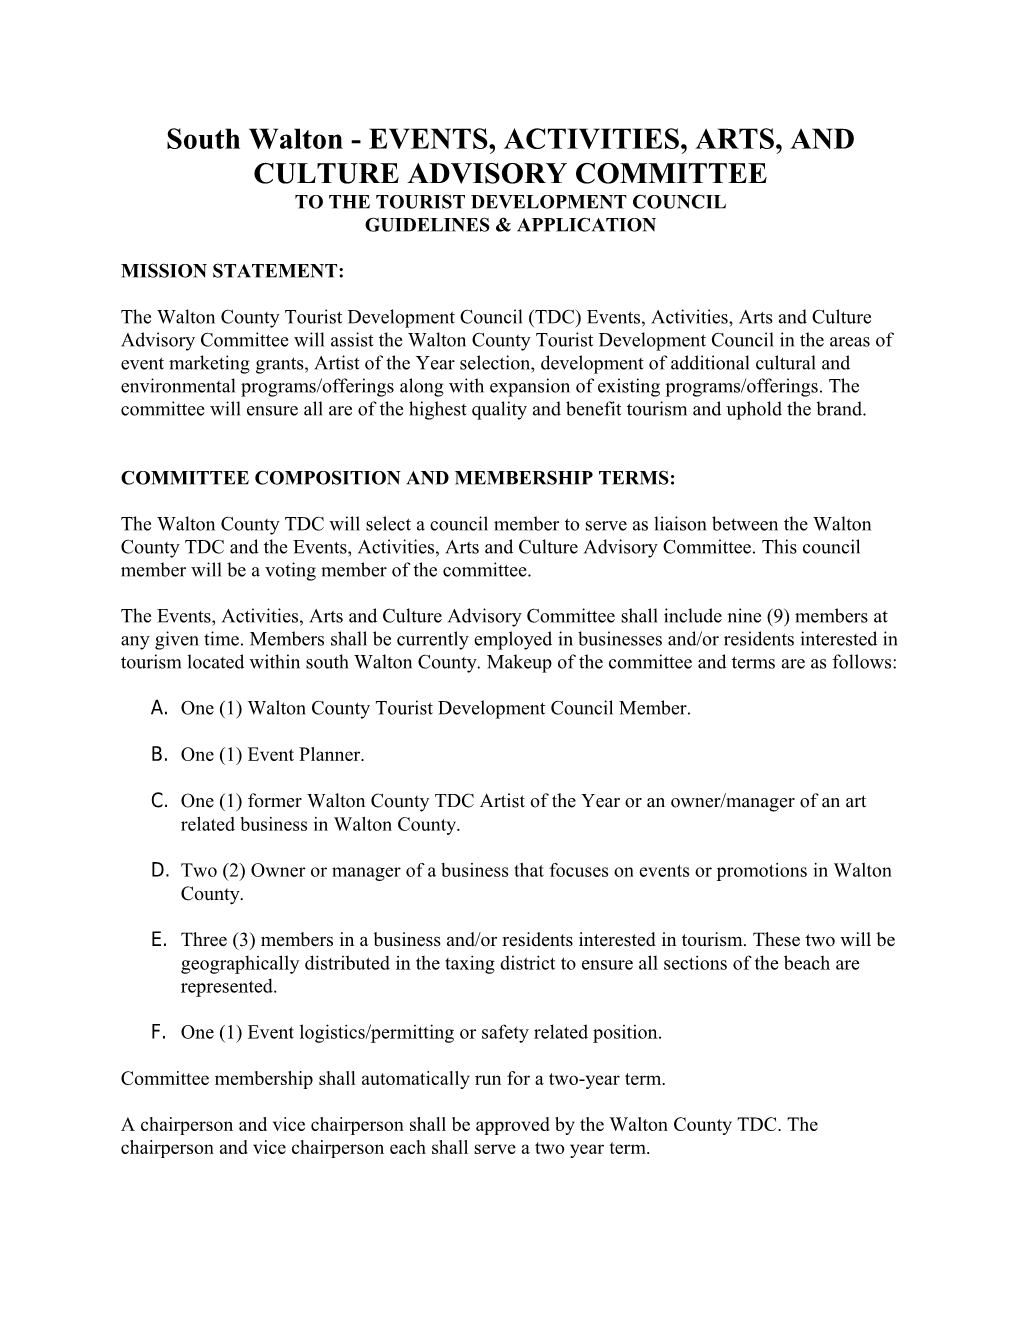 South Walton - EVENTS, ACTIVITIES, ARTS, and CULTURE ADVISORY COMMITTEE